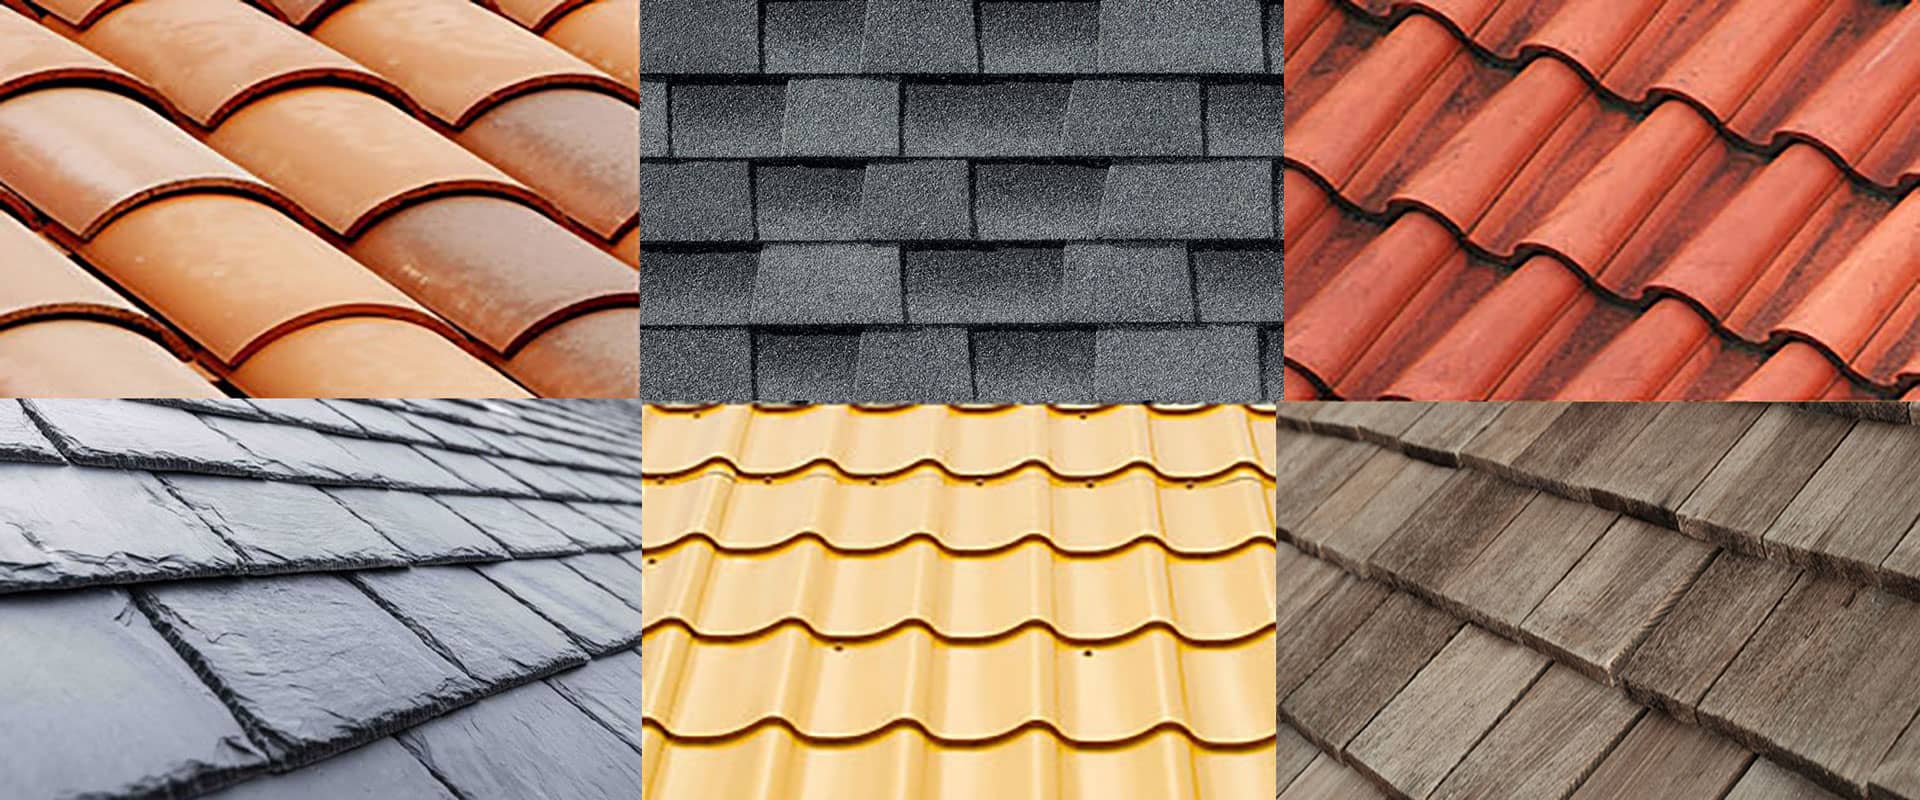 Types of roofing slate tiles